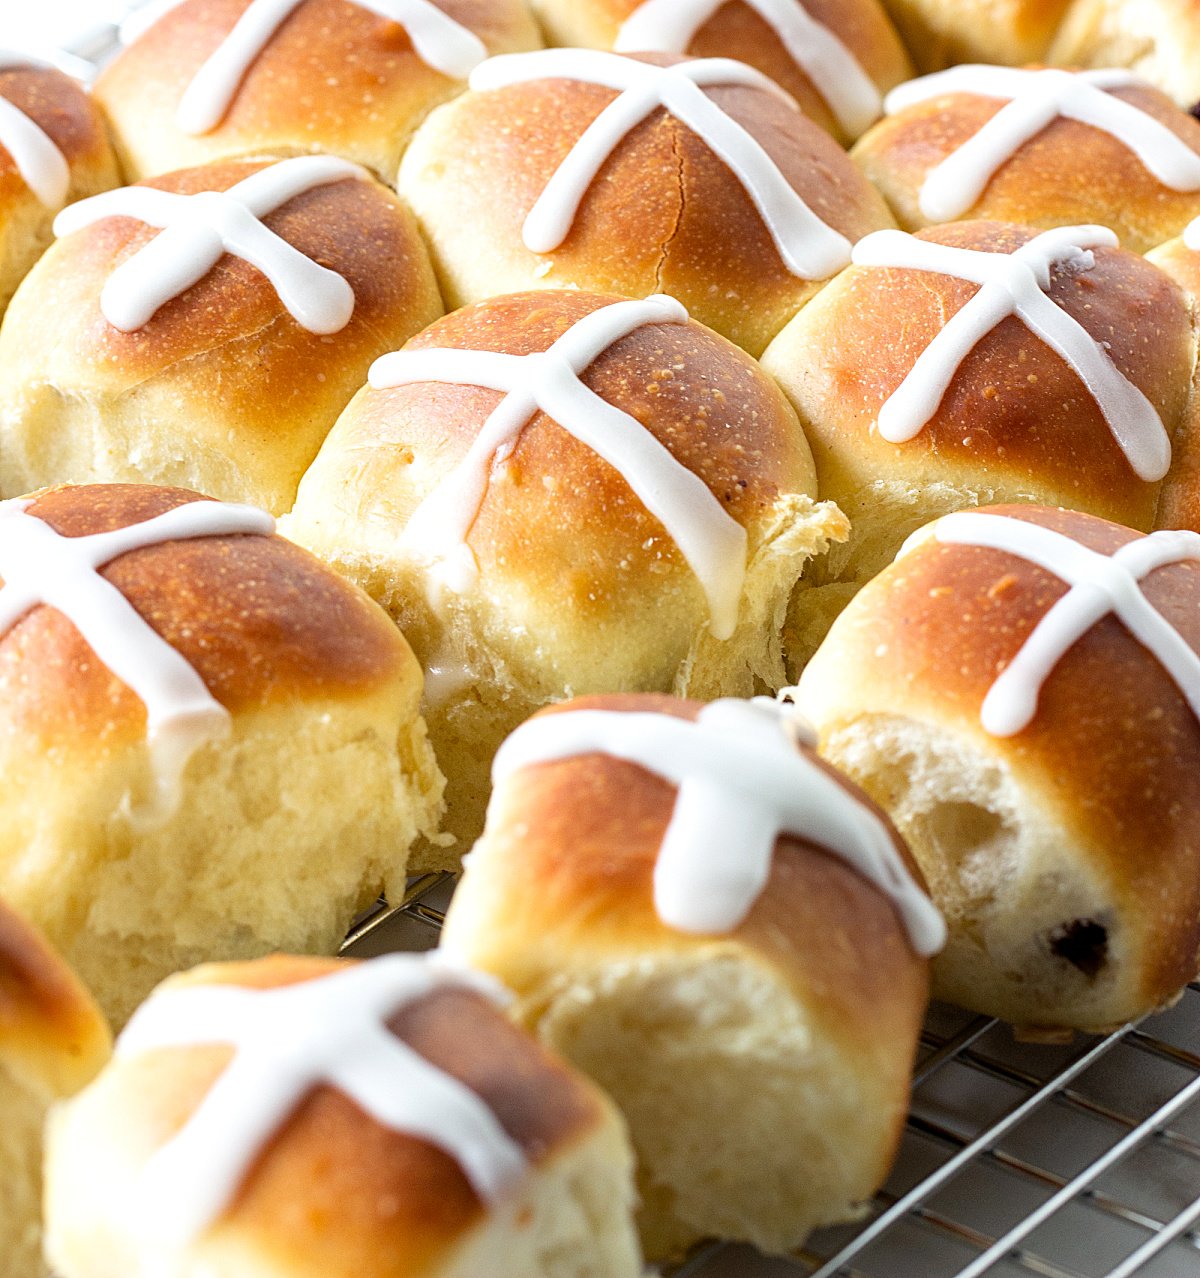 Small buns with white cross on top